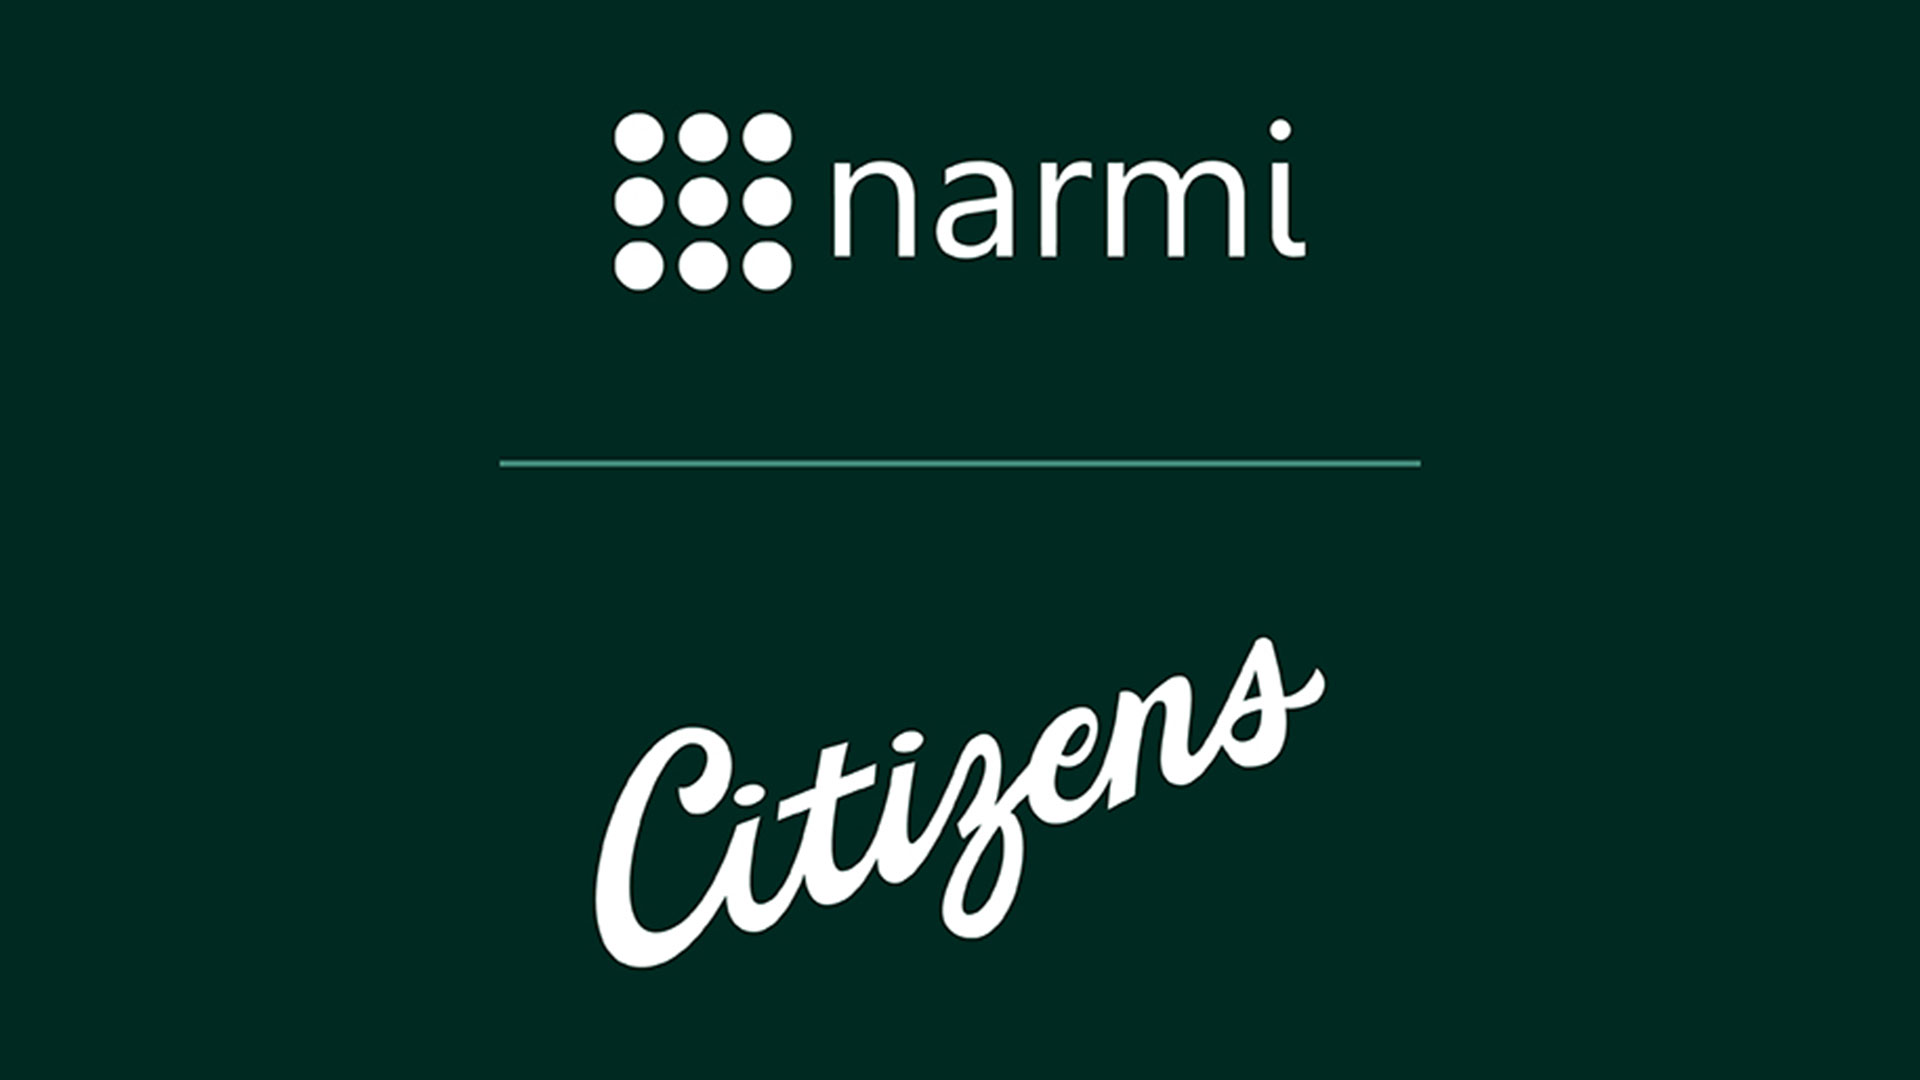 Citizens Bank of Edmond Elevates Customer Experience with Narmi's Digital Banking Solutions